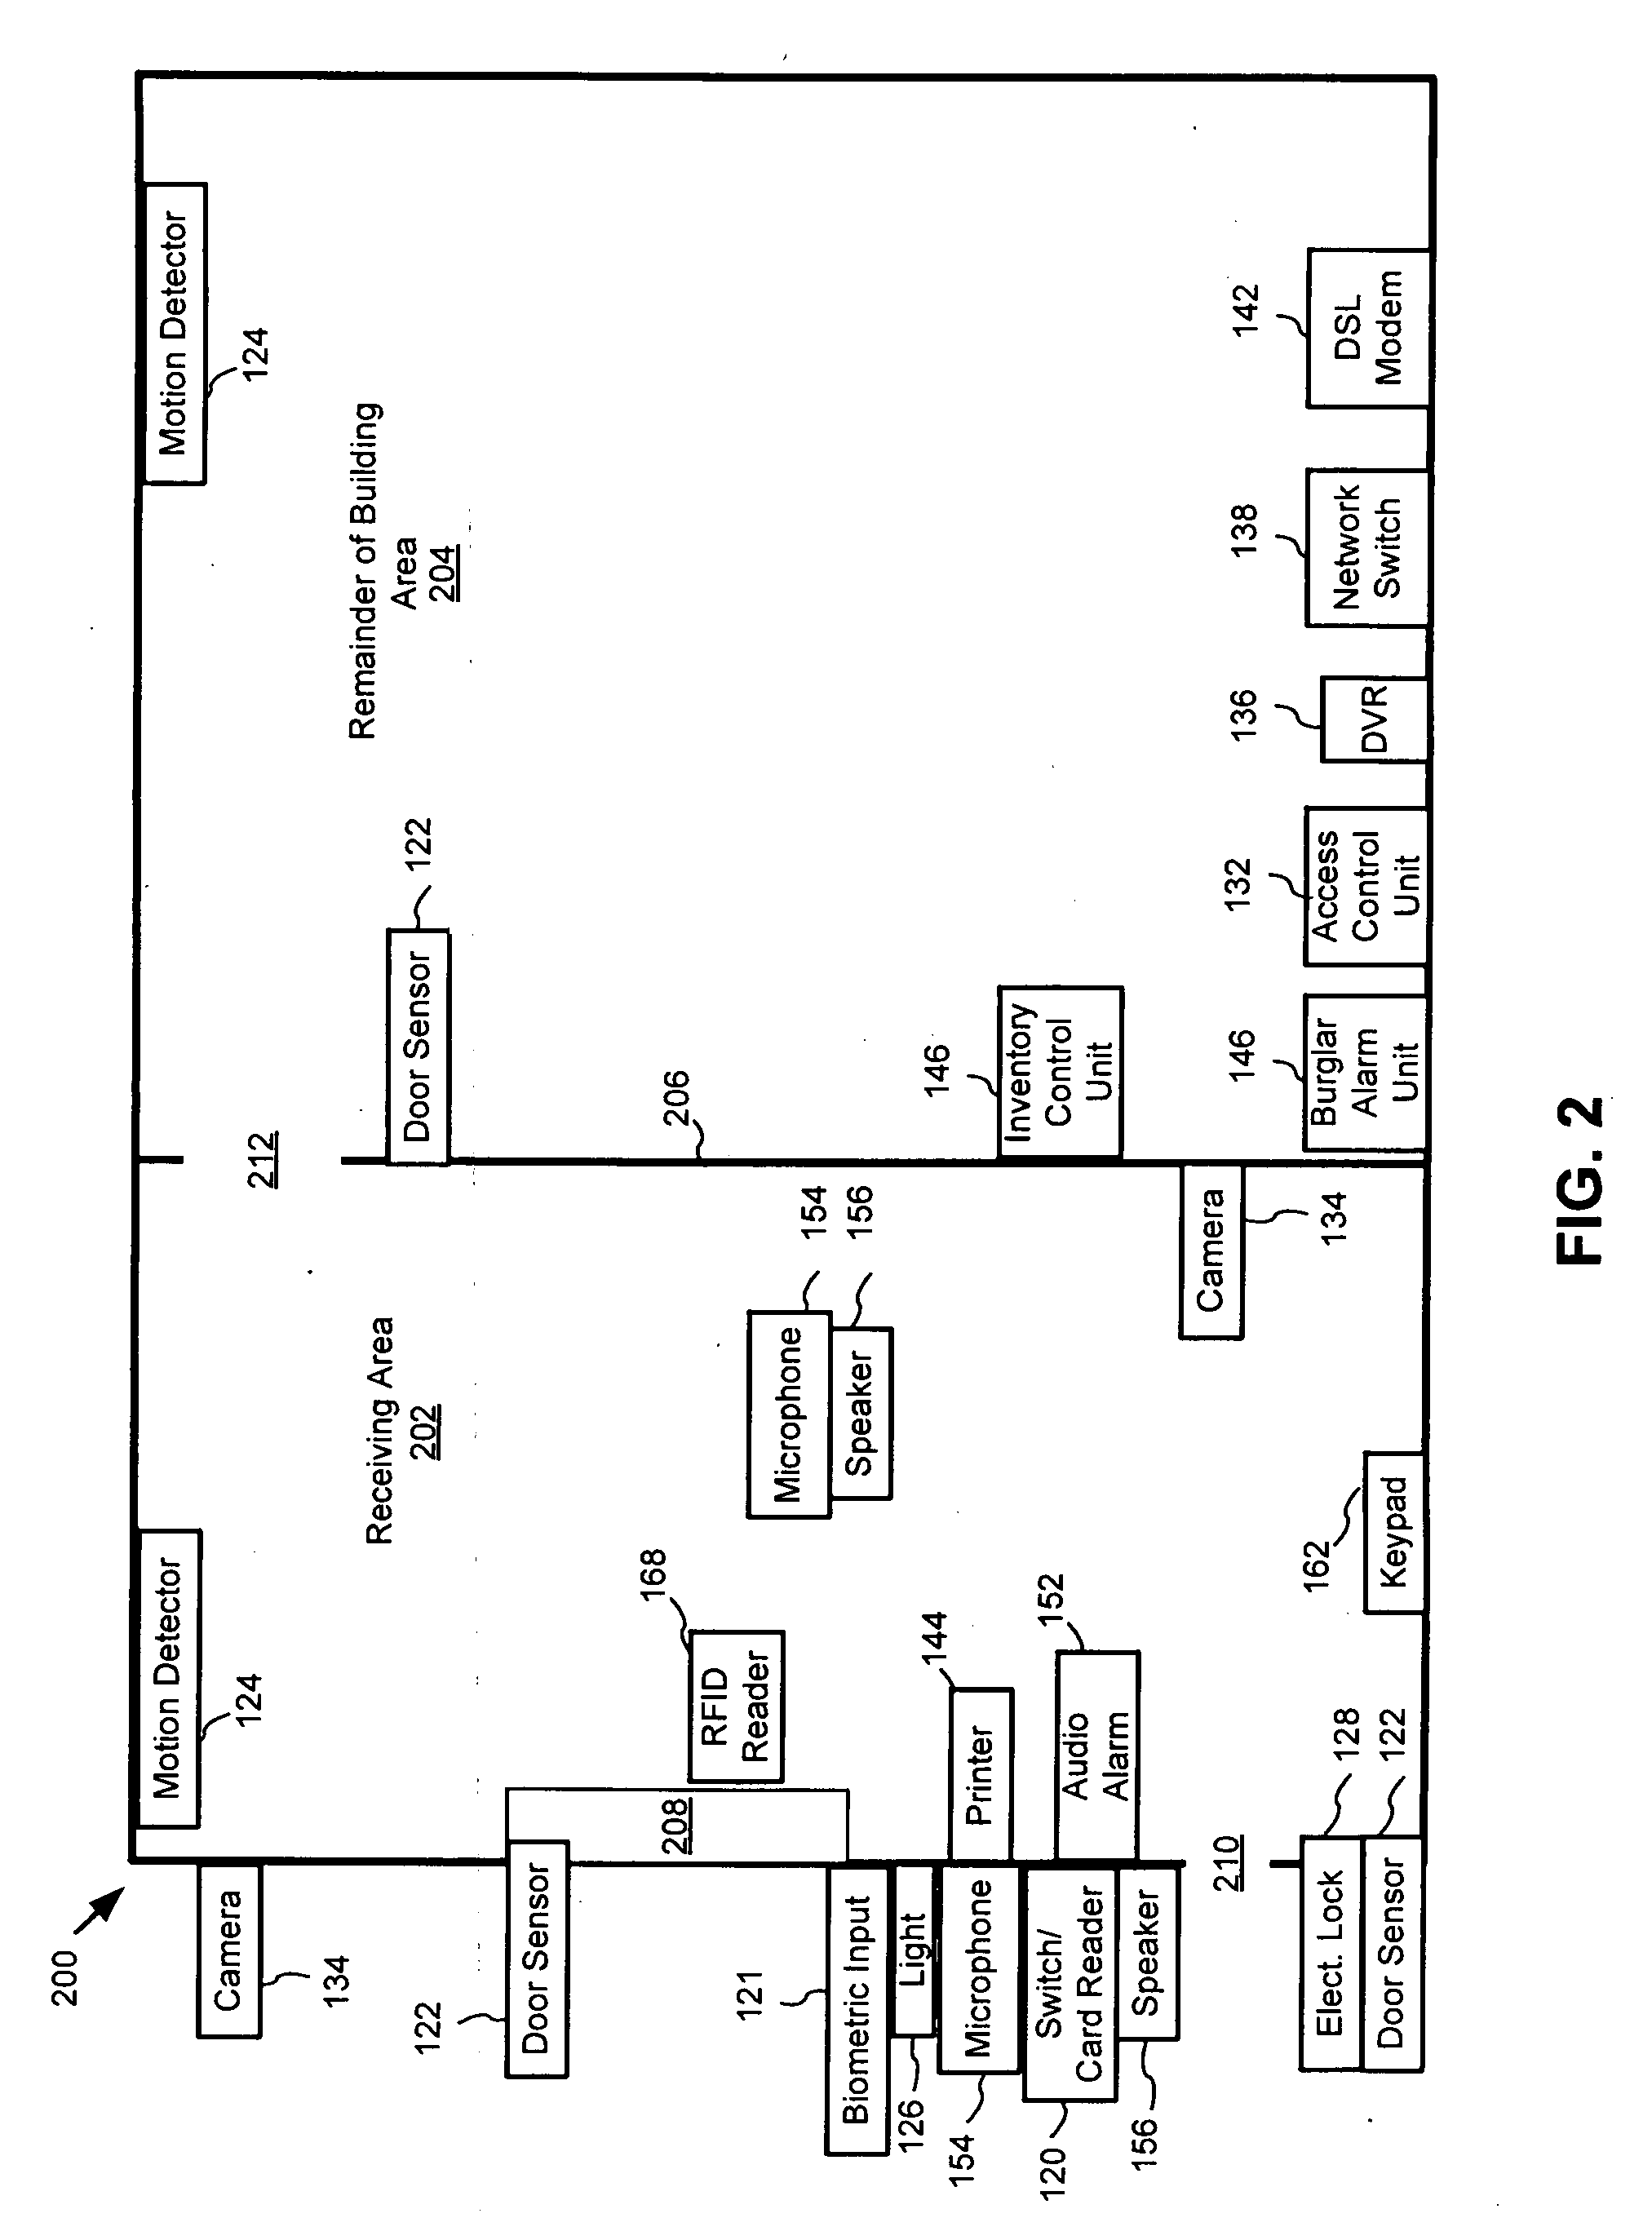 System and method for remotely attended delivery